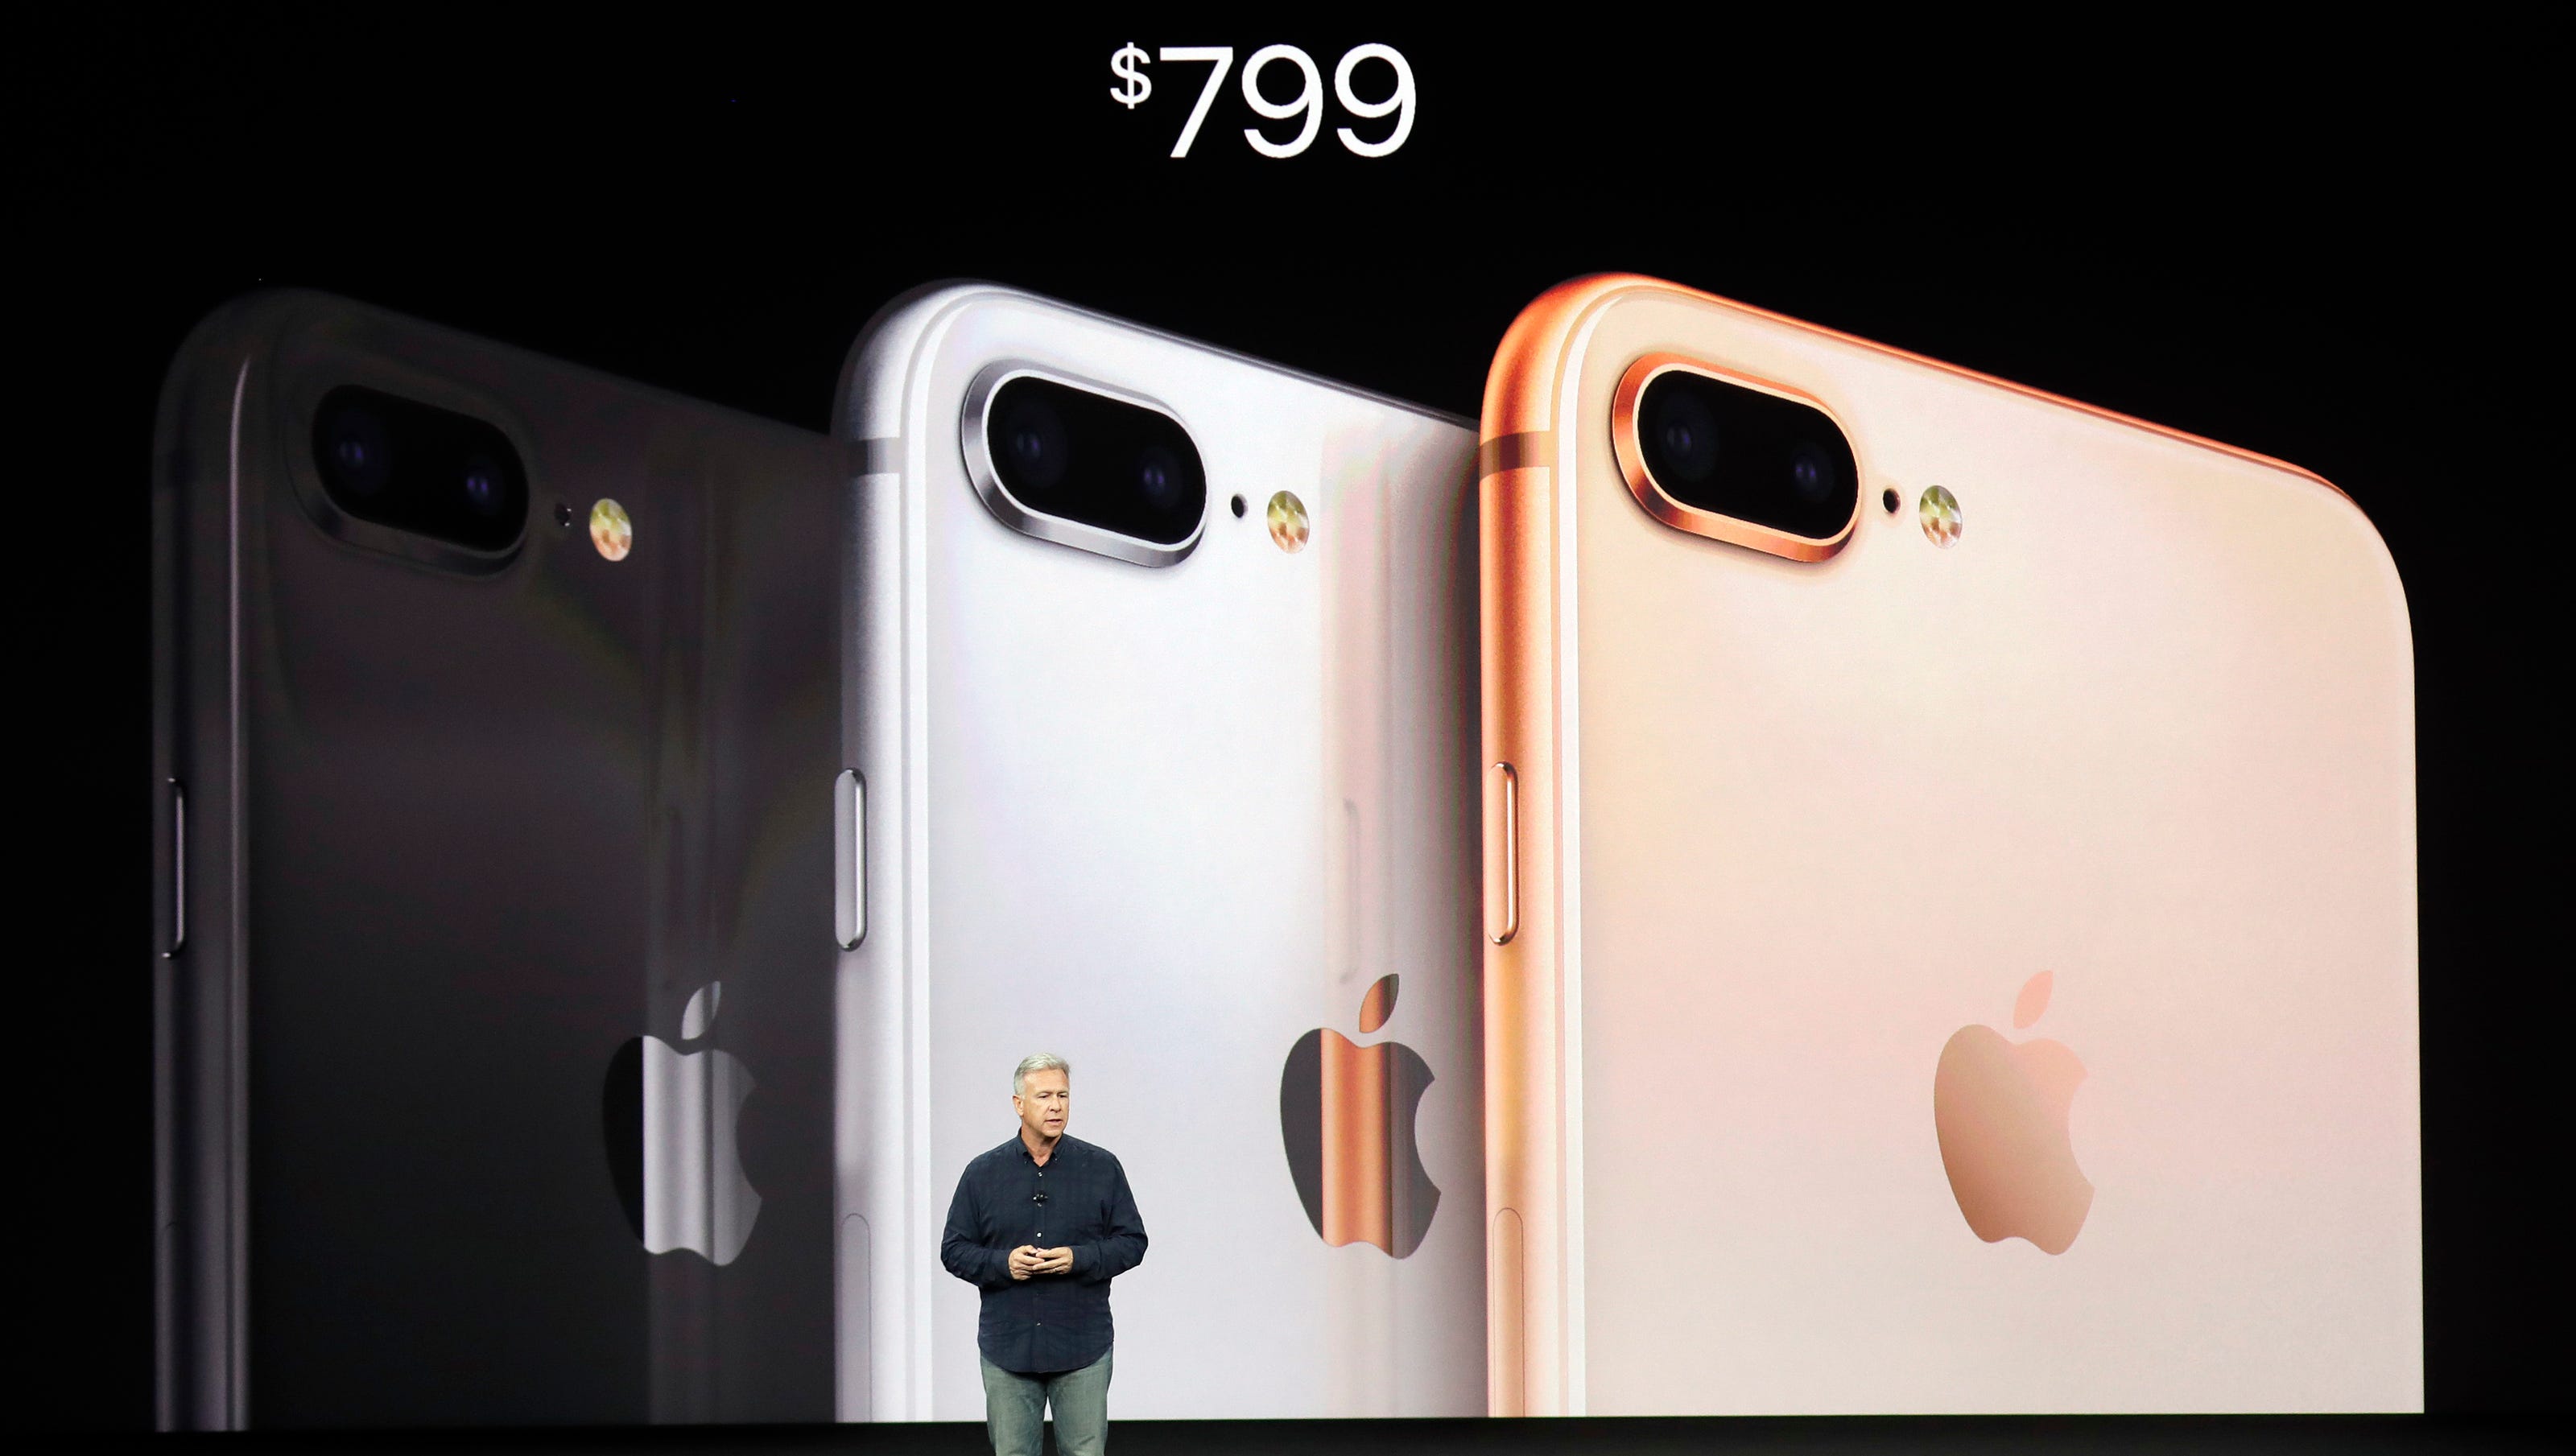 Iphone X Pricing Features Vs Iphone 8 And 8 Plus